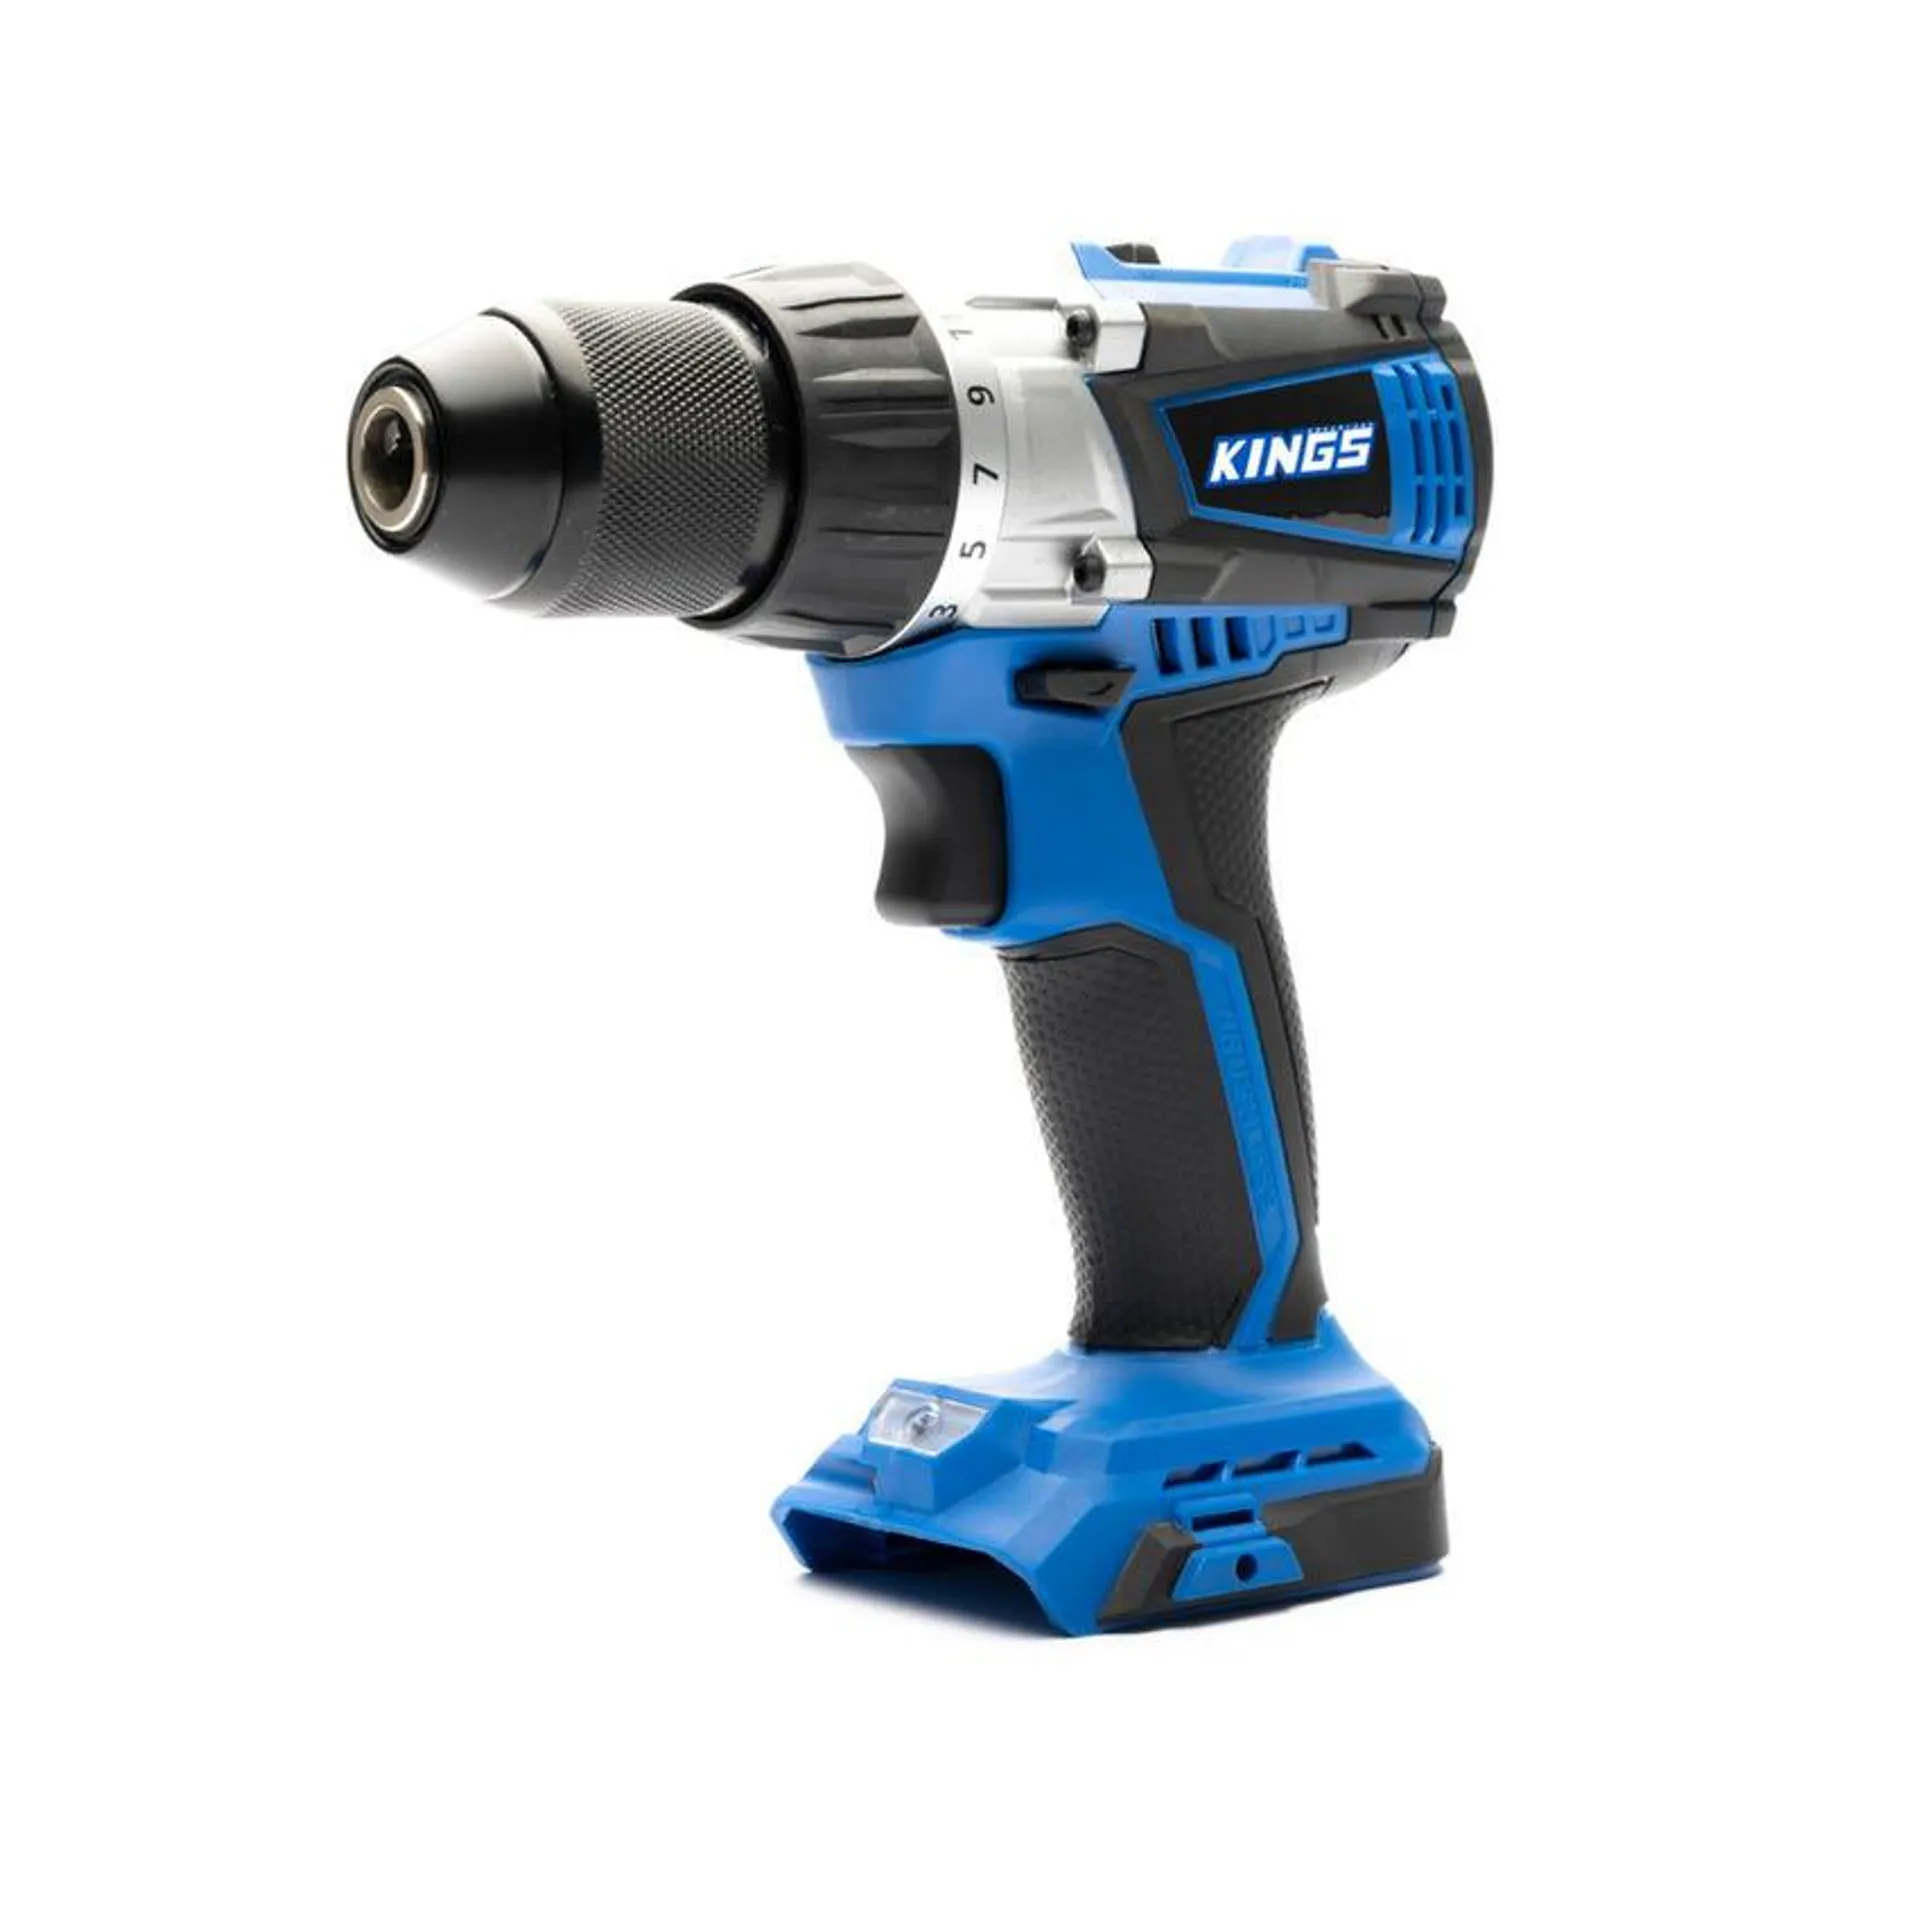 Kings 20V Brushless Drill Driver | 2 Speed Gearbox | 13mm Ratcheting Chuck | Compatible with Kings 20V Lithium Ion Batteries